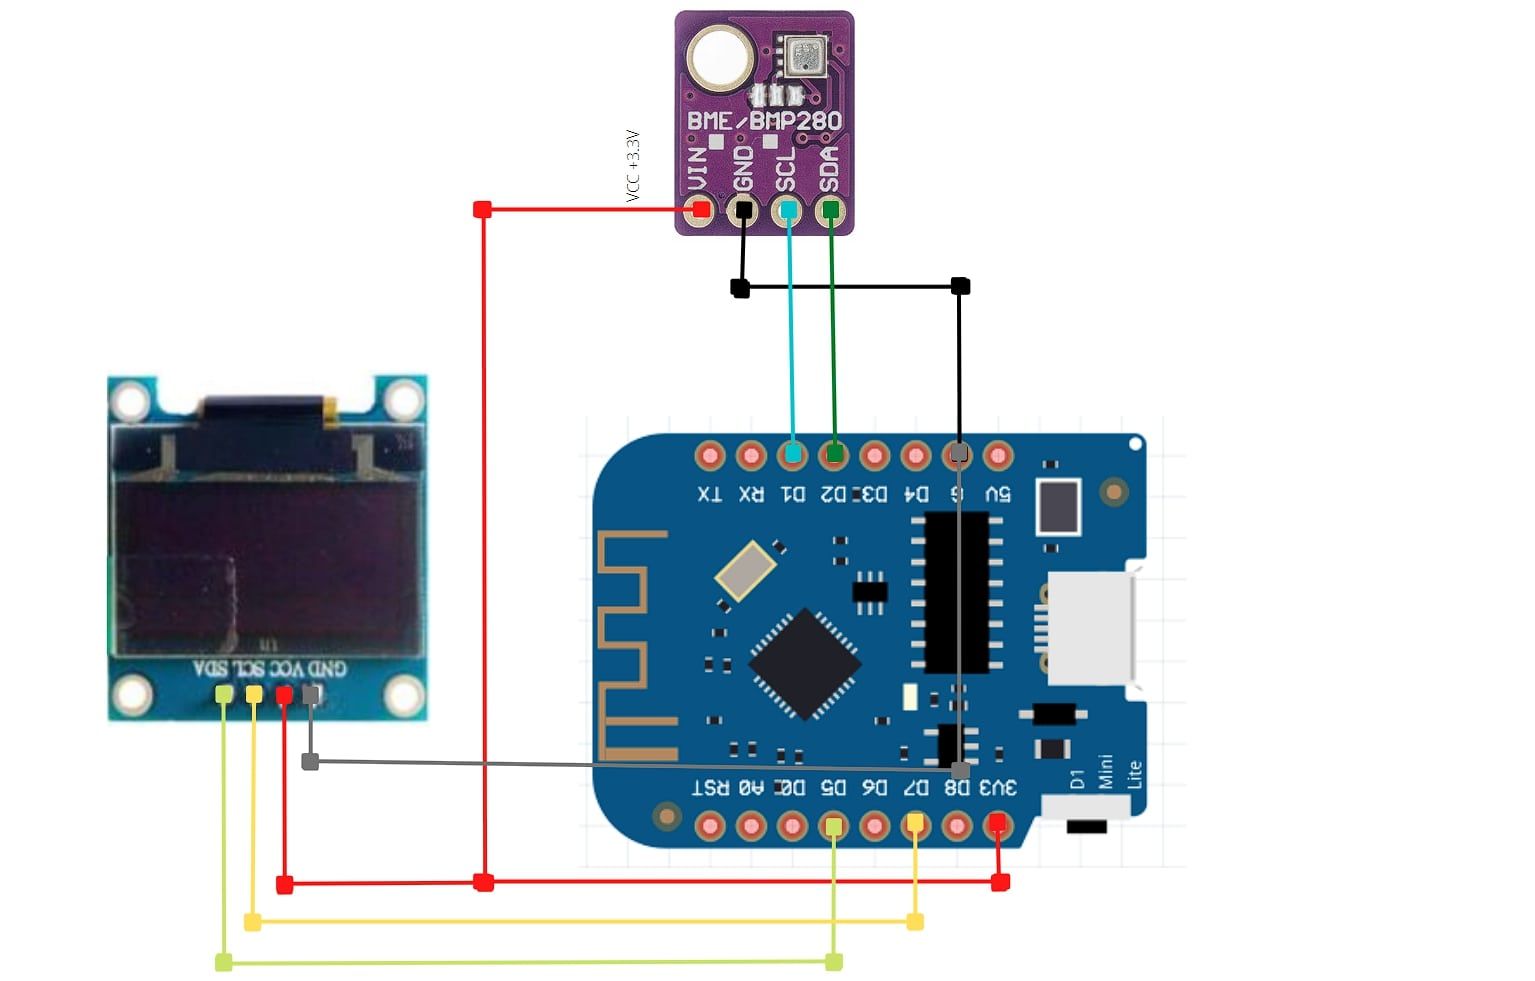 Wiring diagram for connecting BME280 sensor and OLED display to D1 Mini